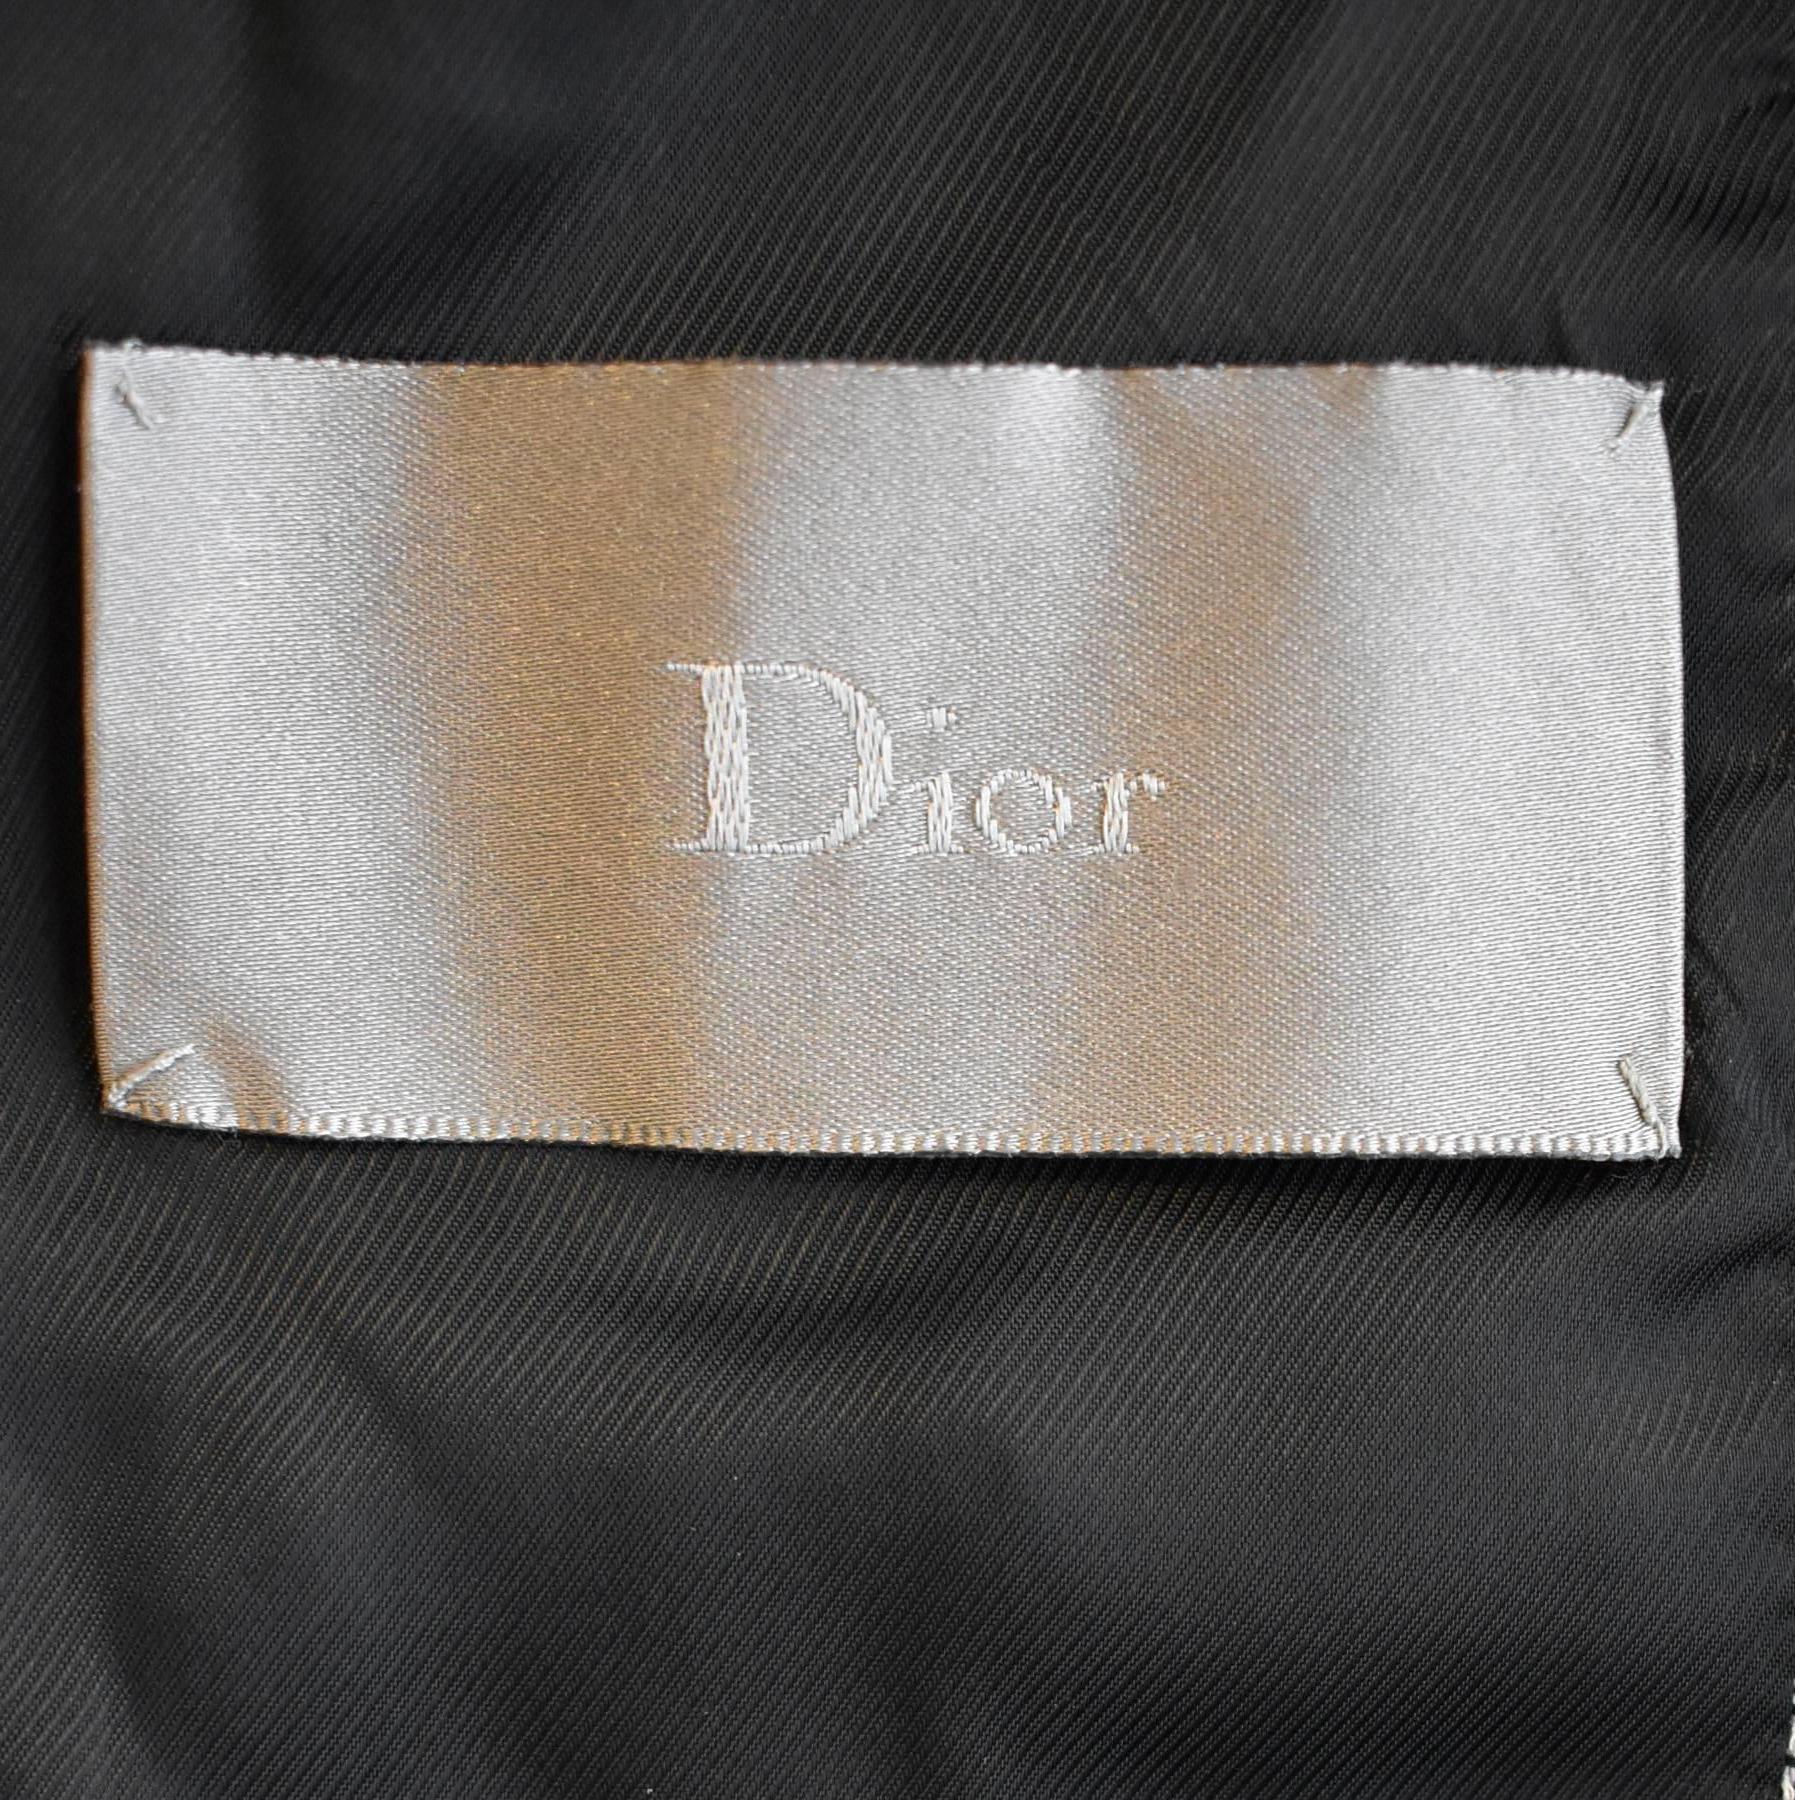 Men's Dior Hedi Slimane Grey Cropped Wool and Silk Jacket with Leather Panel Details For Sale